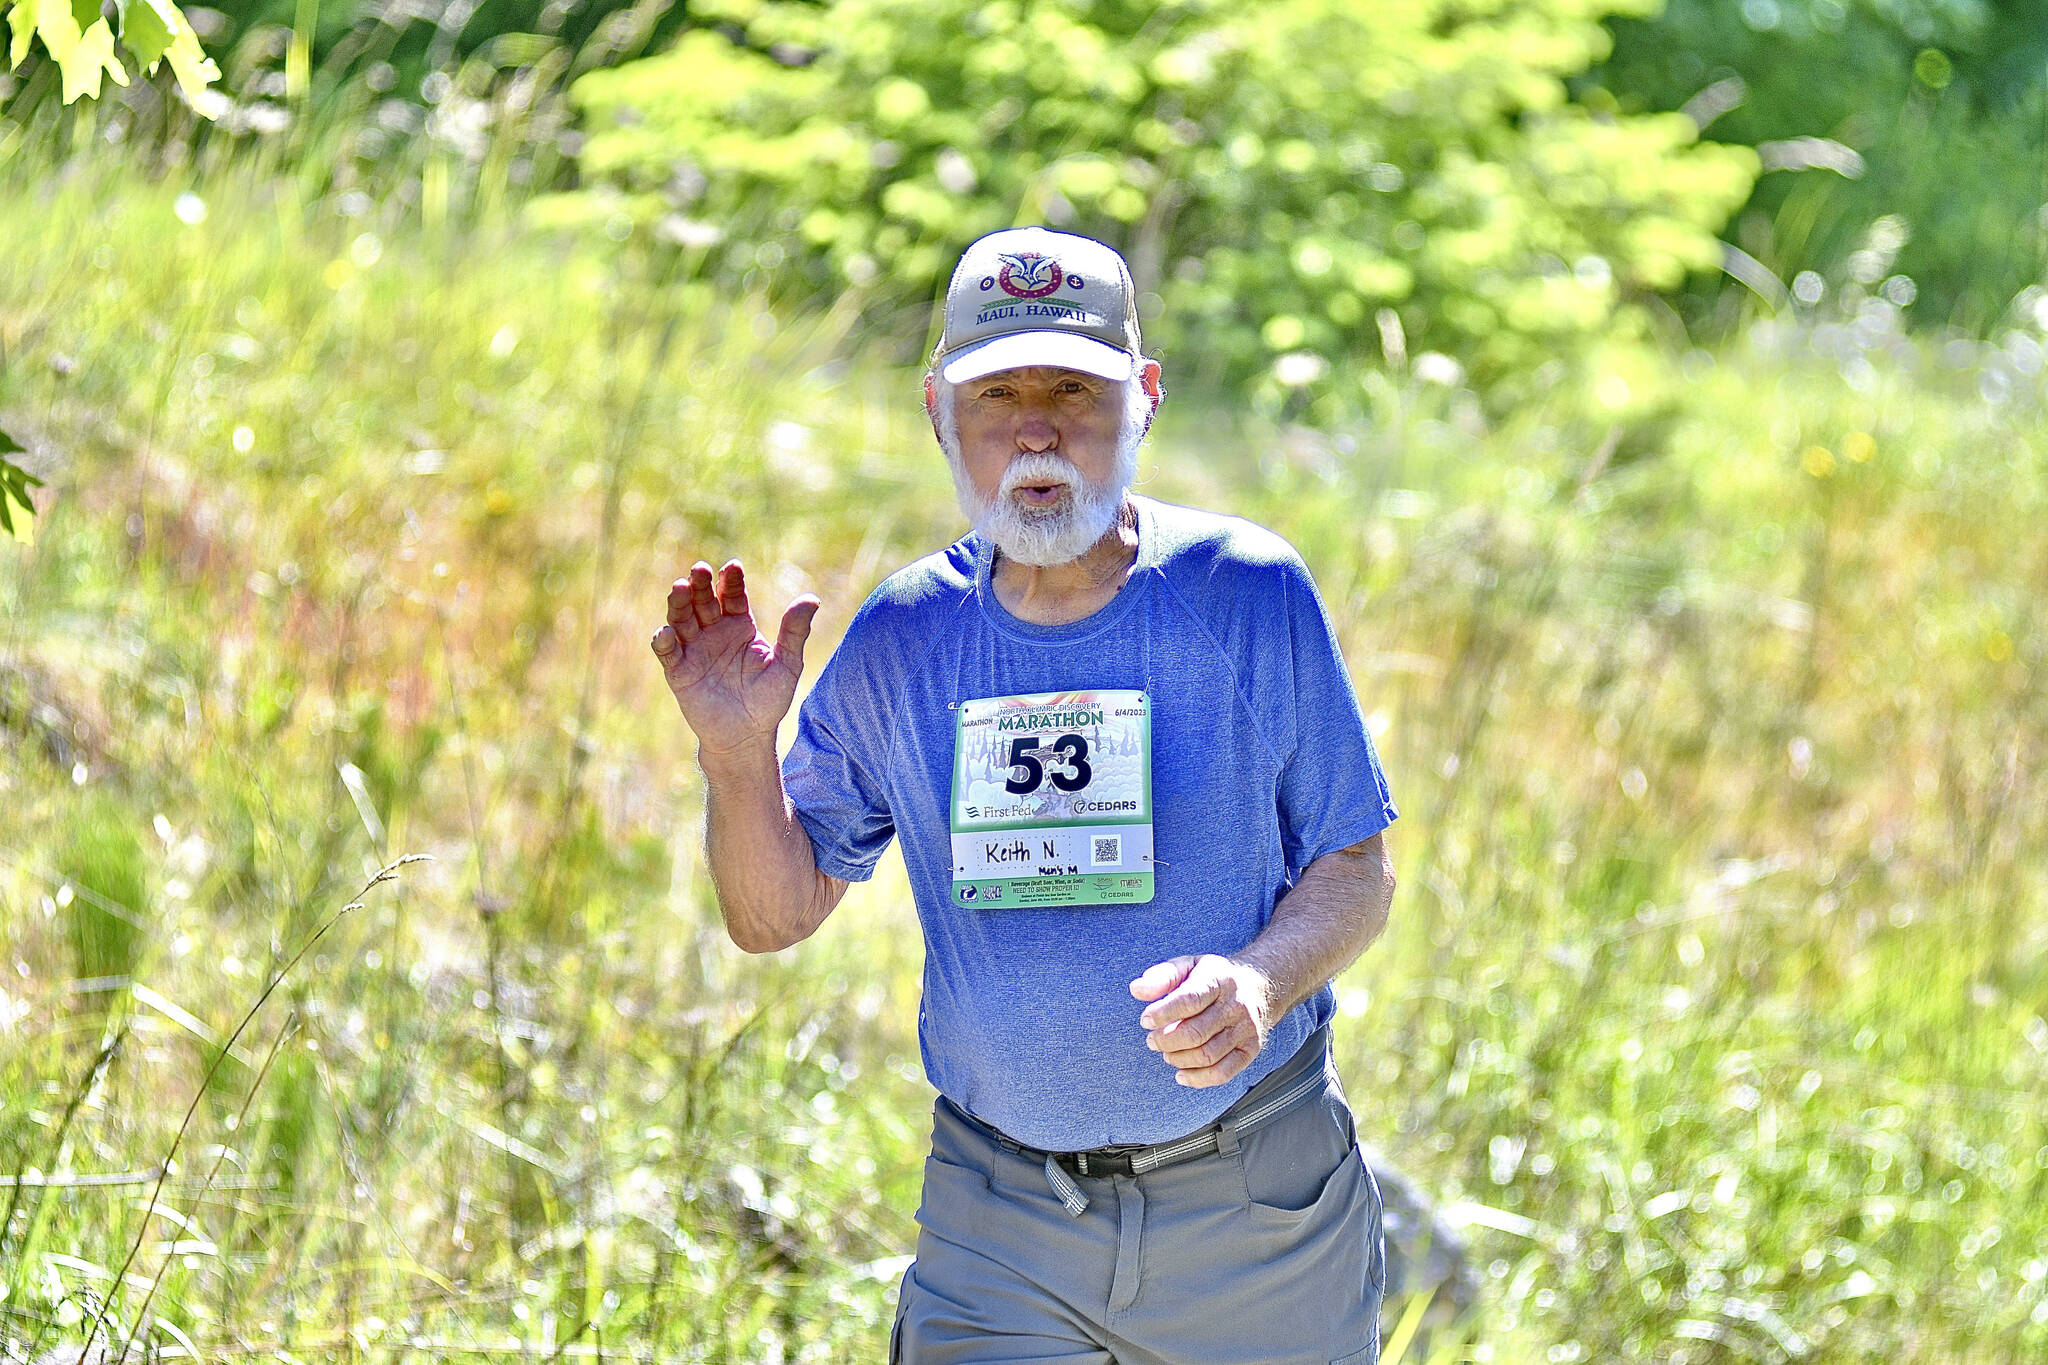 Photo by Jay Cline / Keith Northington, 84, of Sequim, races in the North Olympic Discovery Marathon on June 4. Northington finished in 7:18:02. The oldest runner in this year’s race, Northington cruised to a win in his age class (men 80-89).